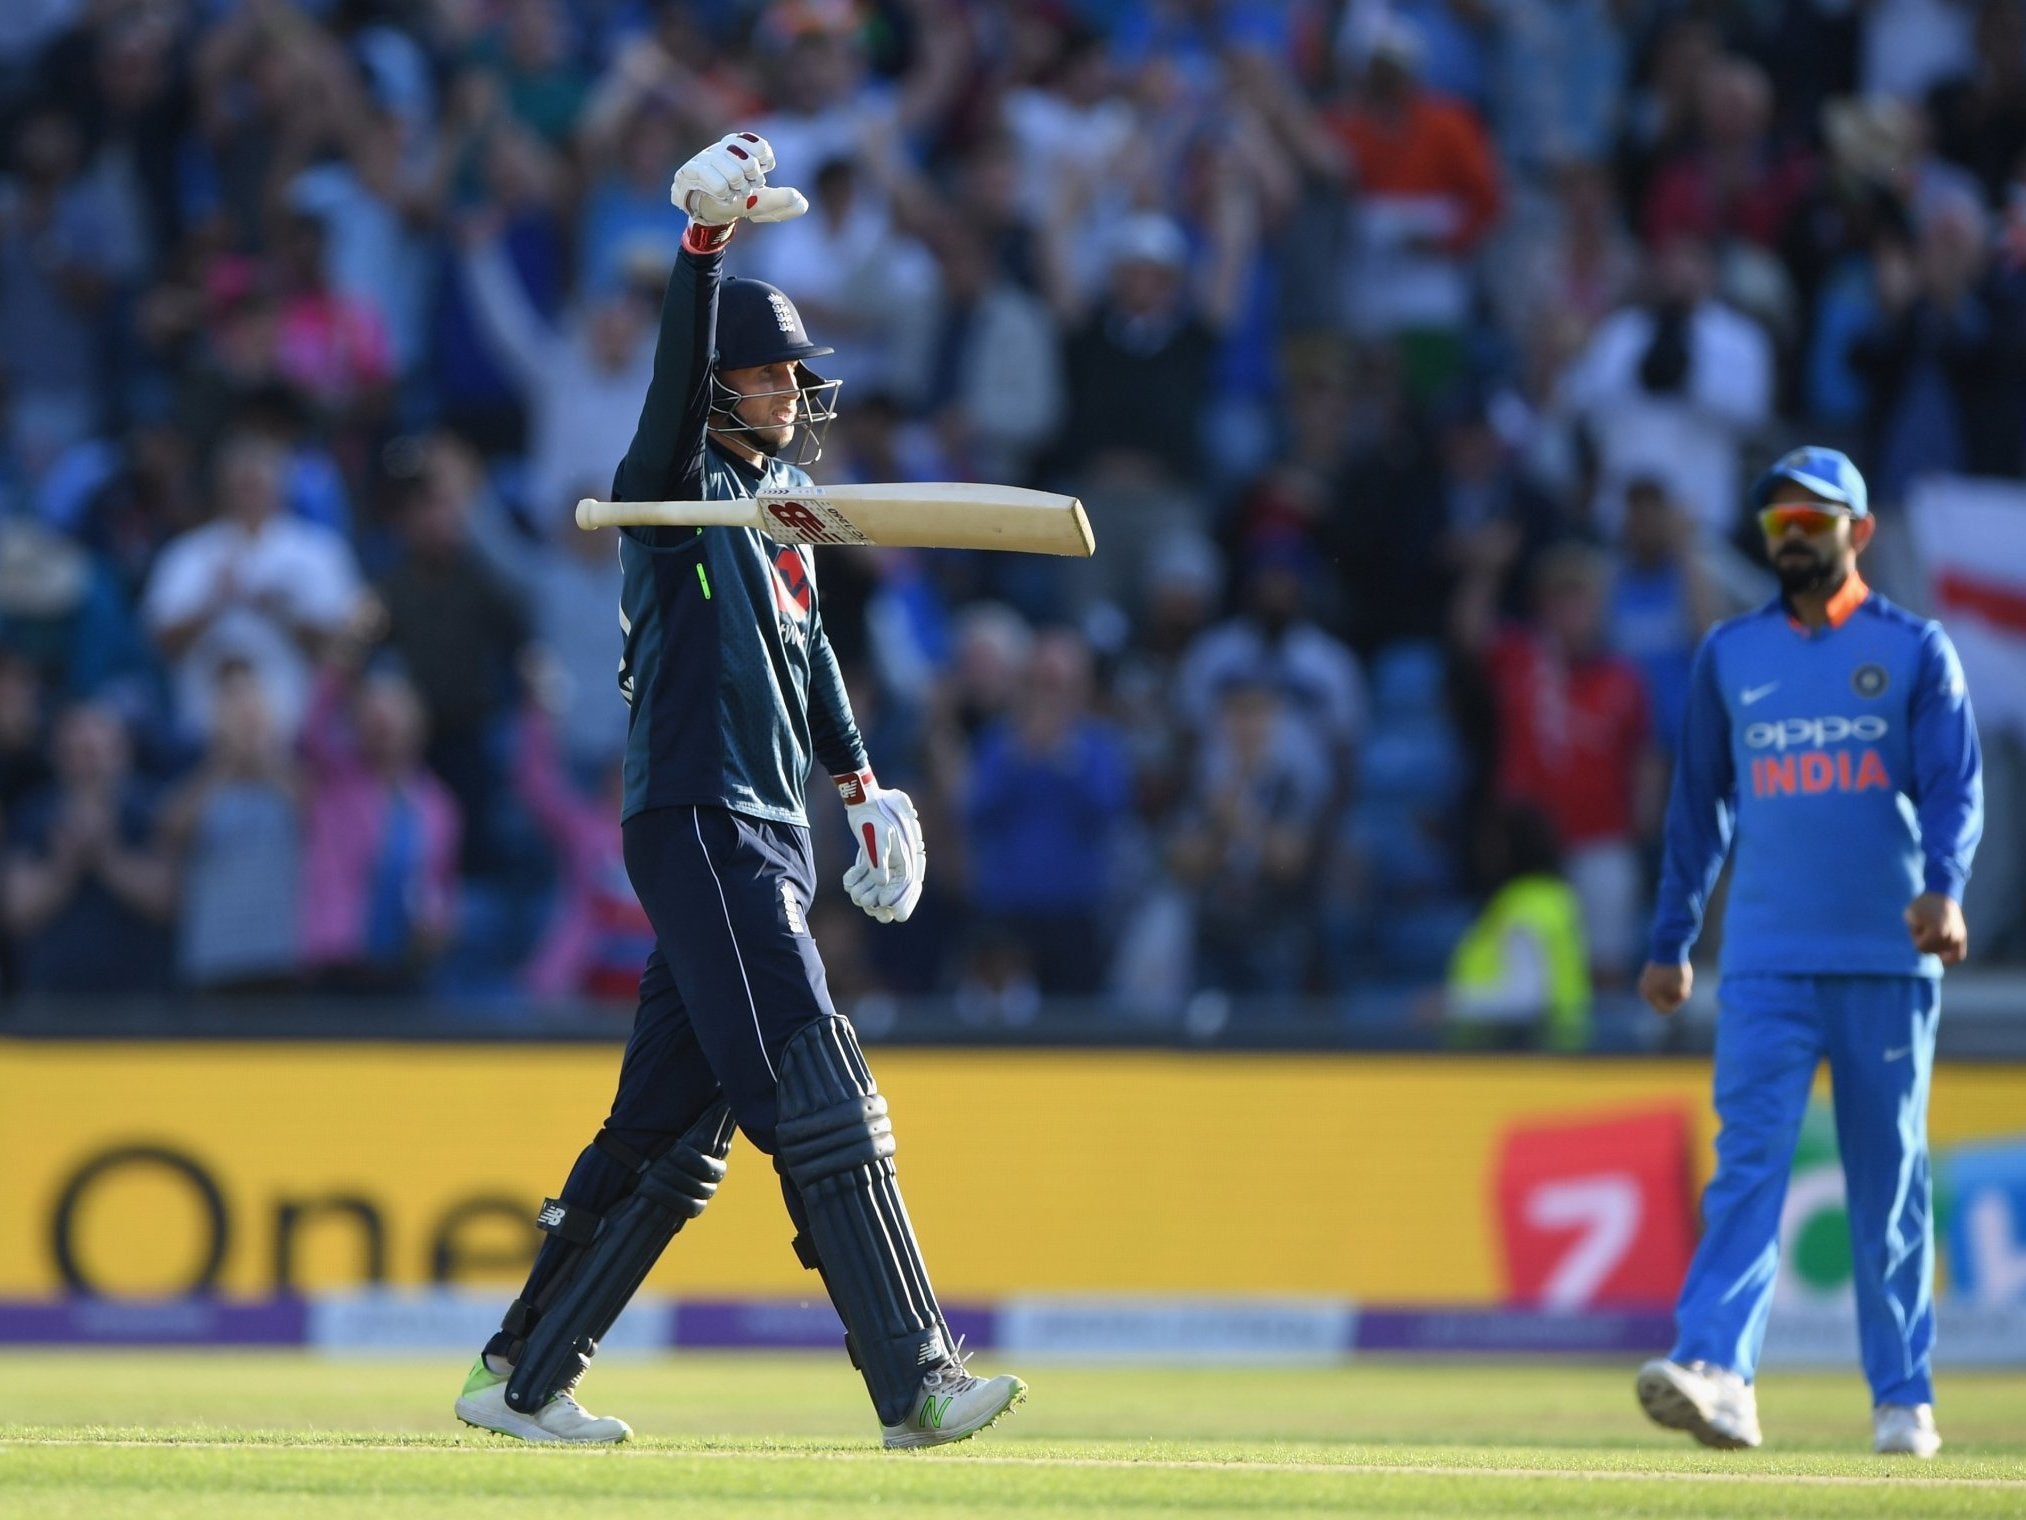 Root celebrated his century on Tuesday with a 'mic-drop' celebration